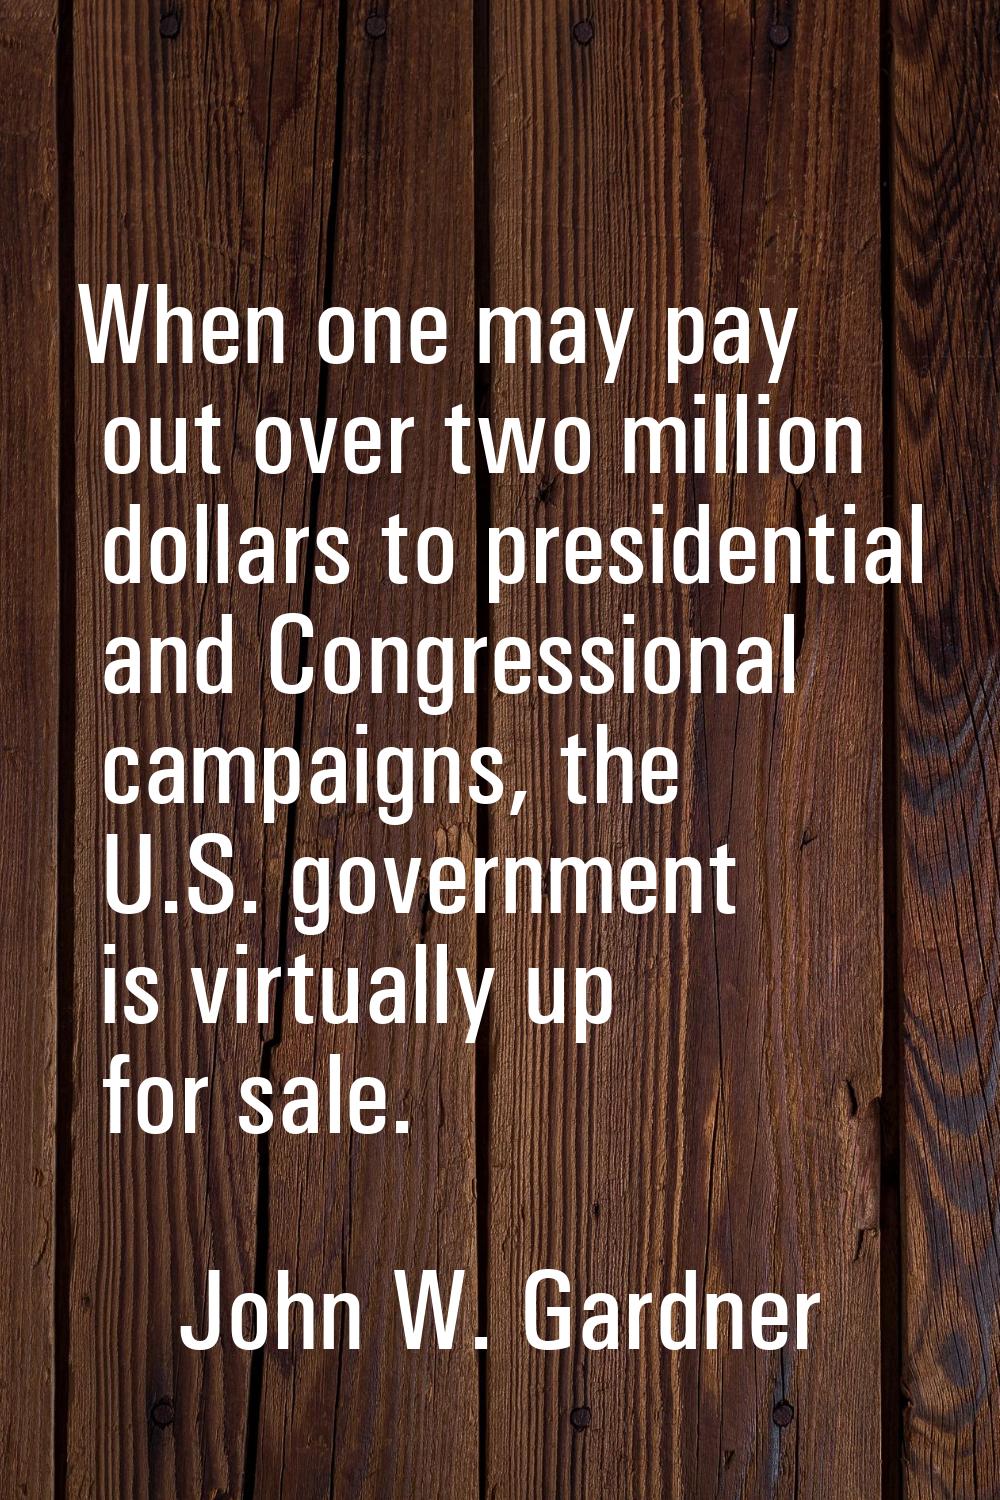 When one may pay out over two million dollars to presidential and Congressional campaigns, the U.S.